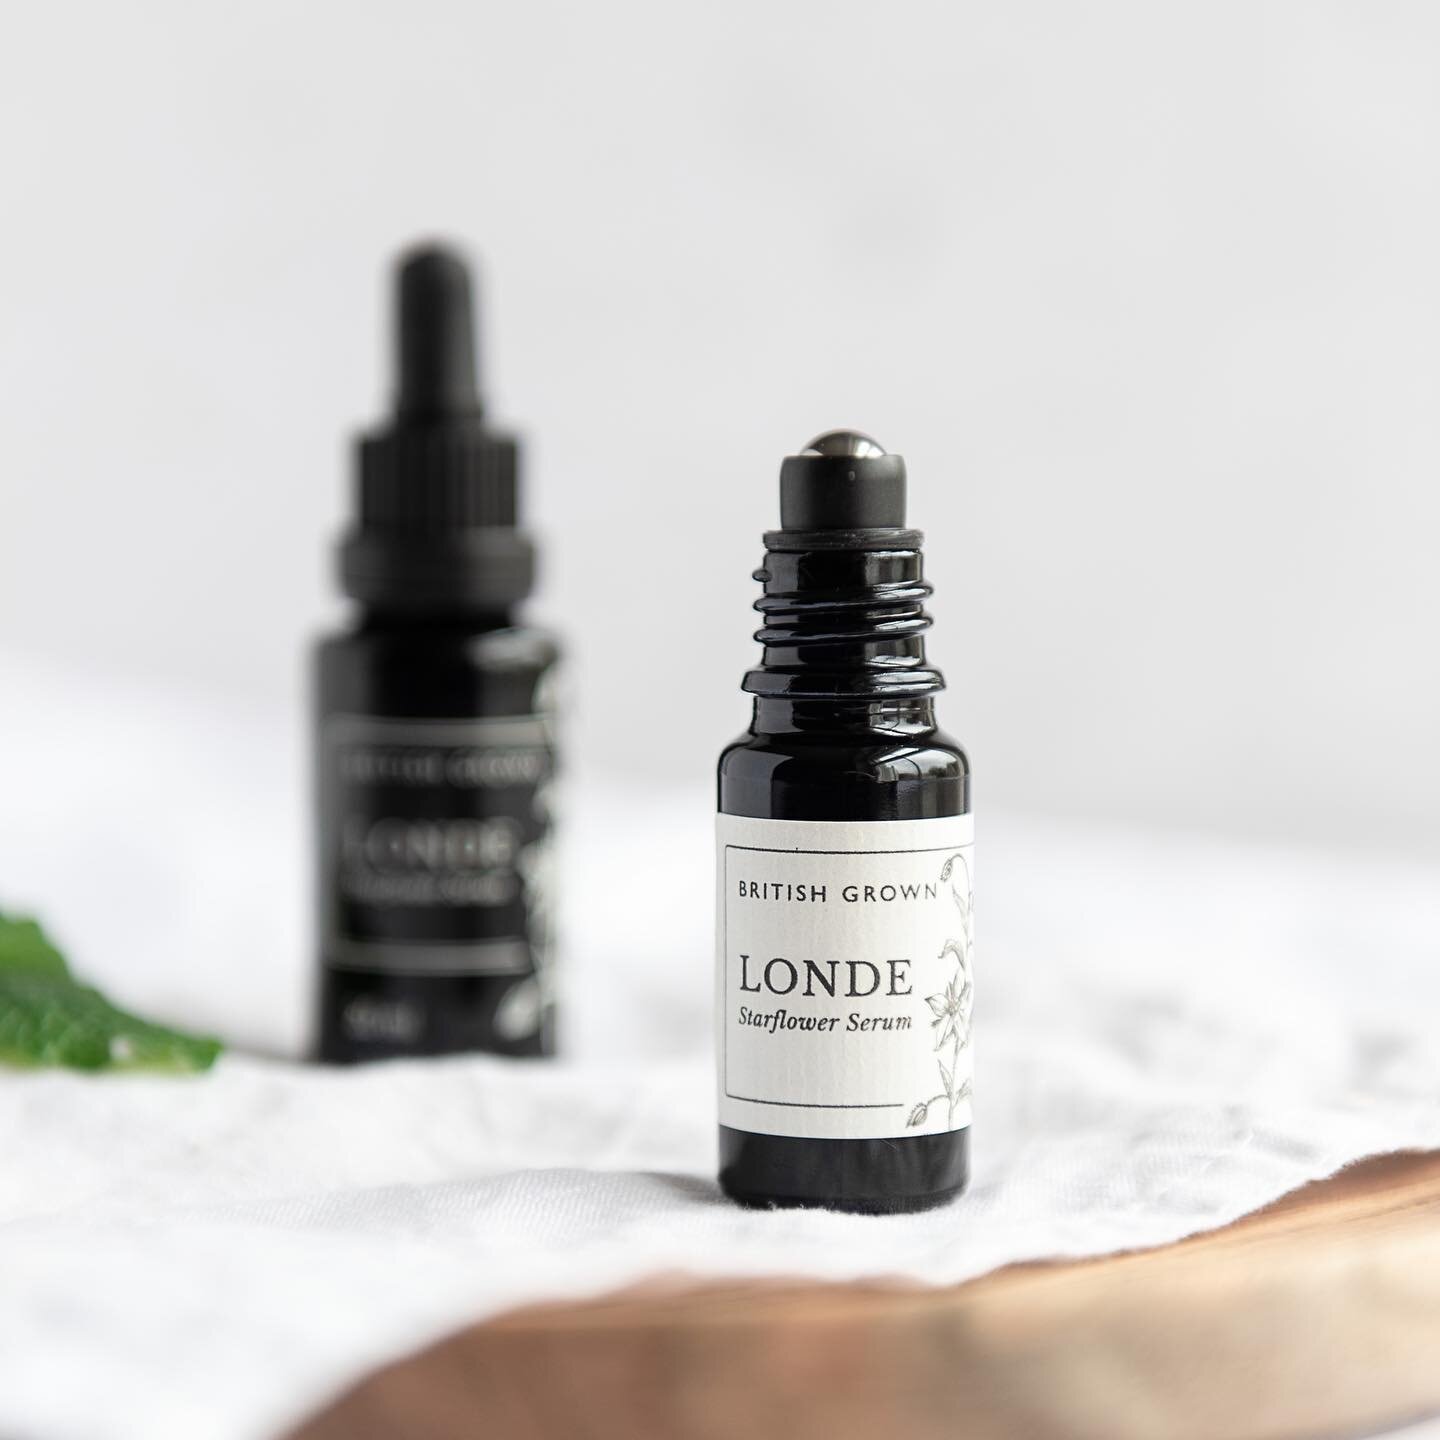 Sensitive skin? I created our light, gentle Starflower Serum for anyone wanting the purest, unscented natural ingredients. Made from UK grown starflower &amp; chia seed oils, enriched with Vitamin E. A natural saviour to soften, revitalise and protec